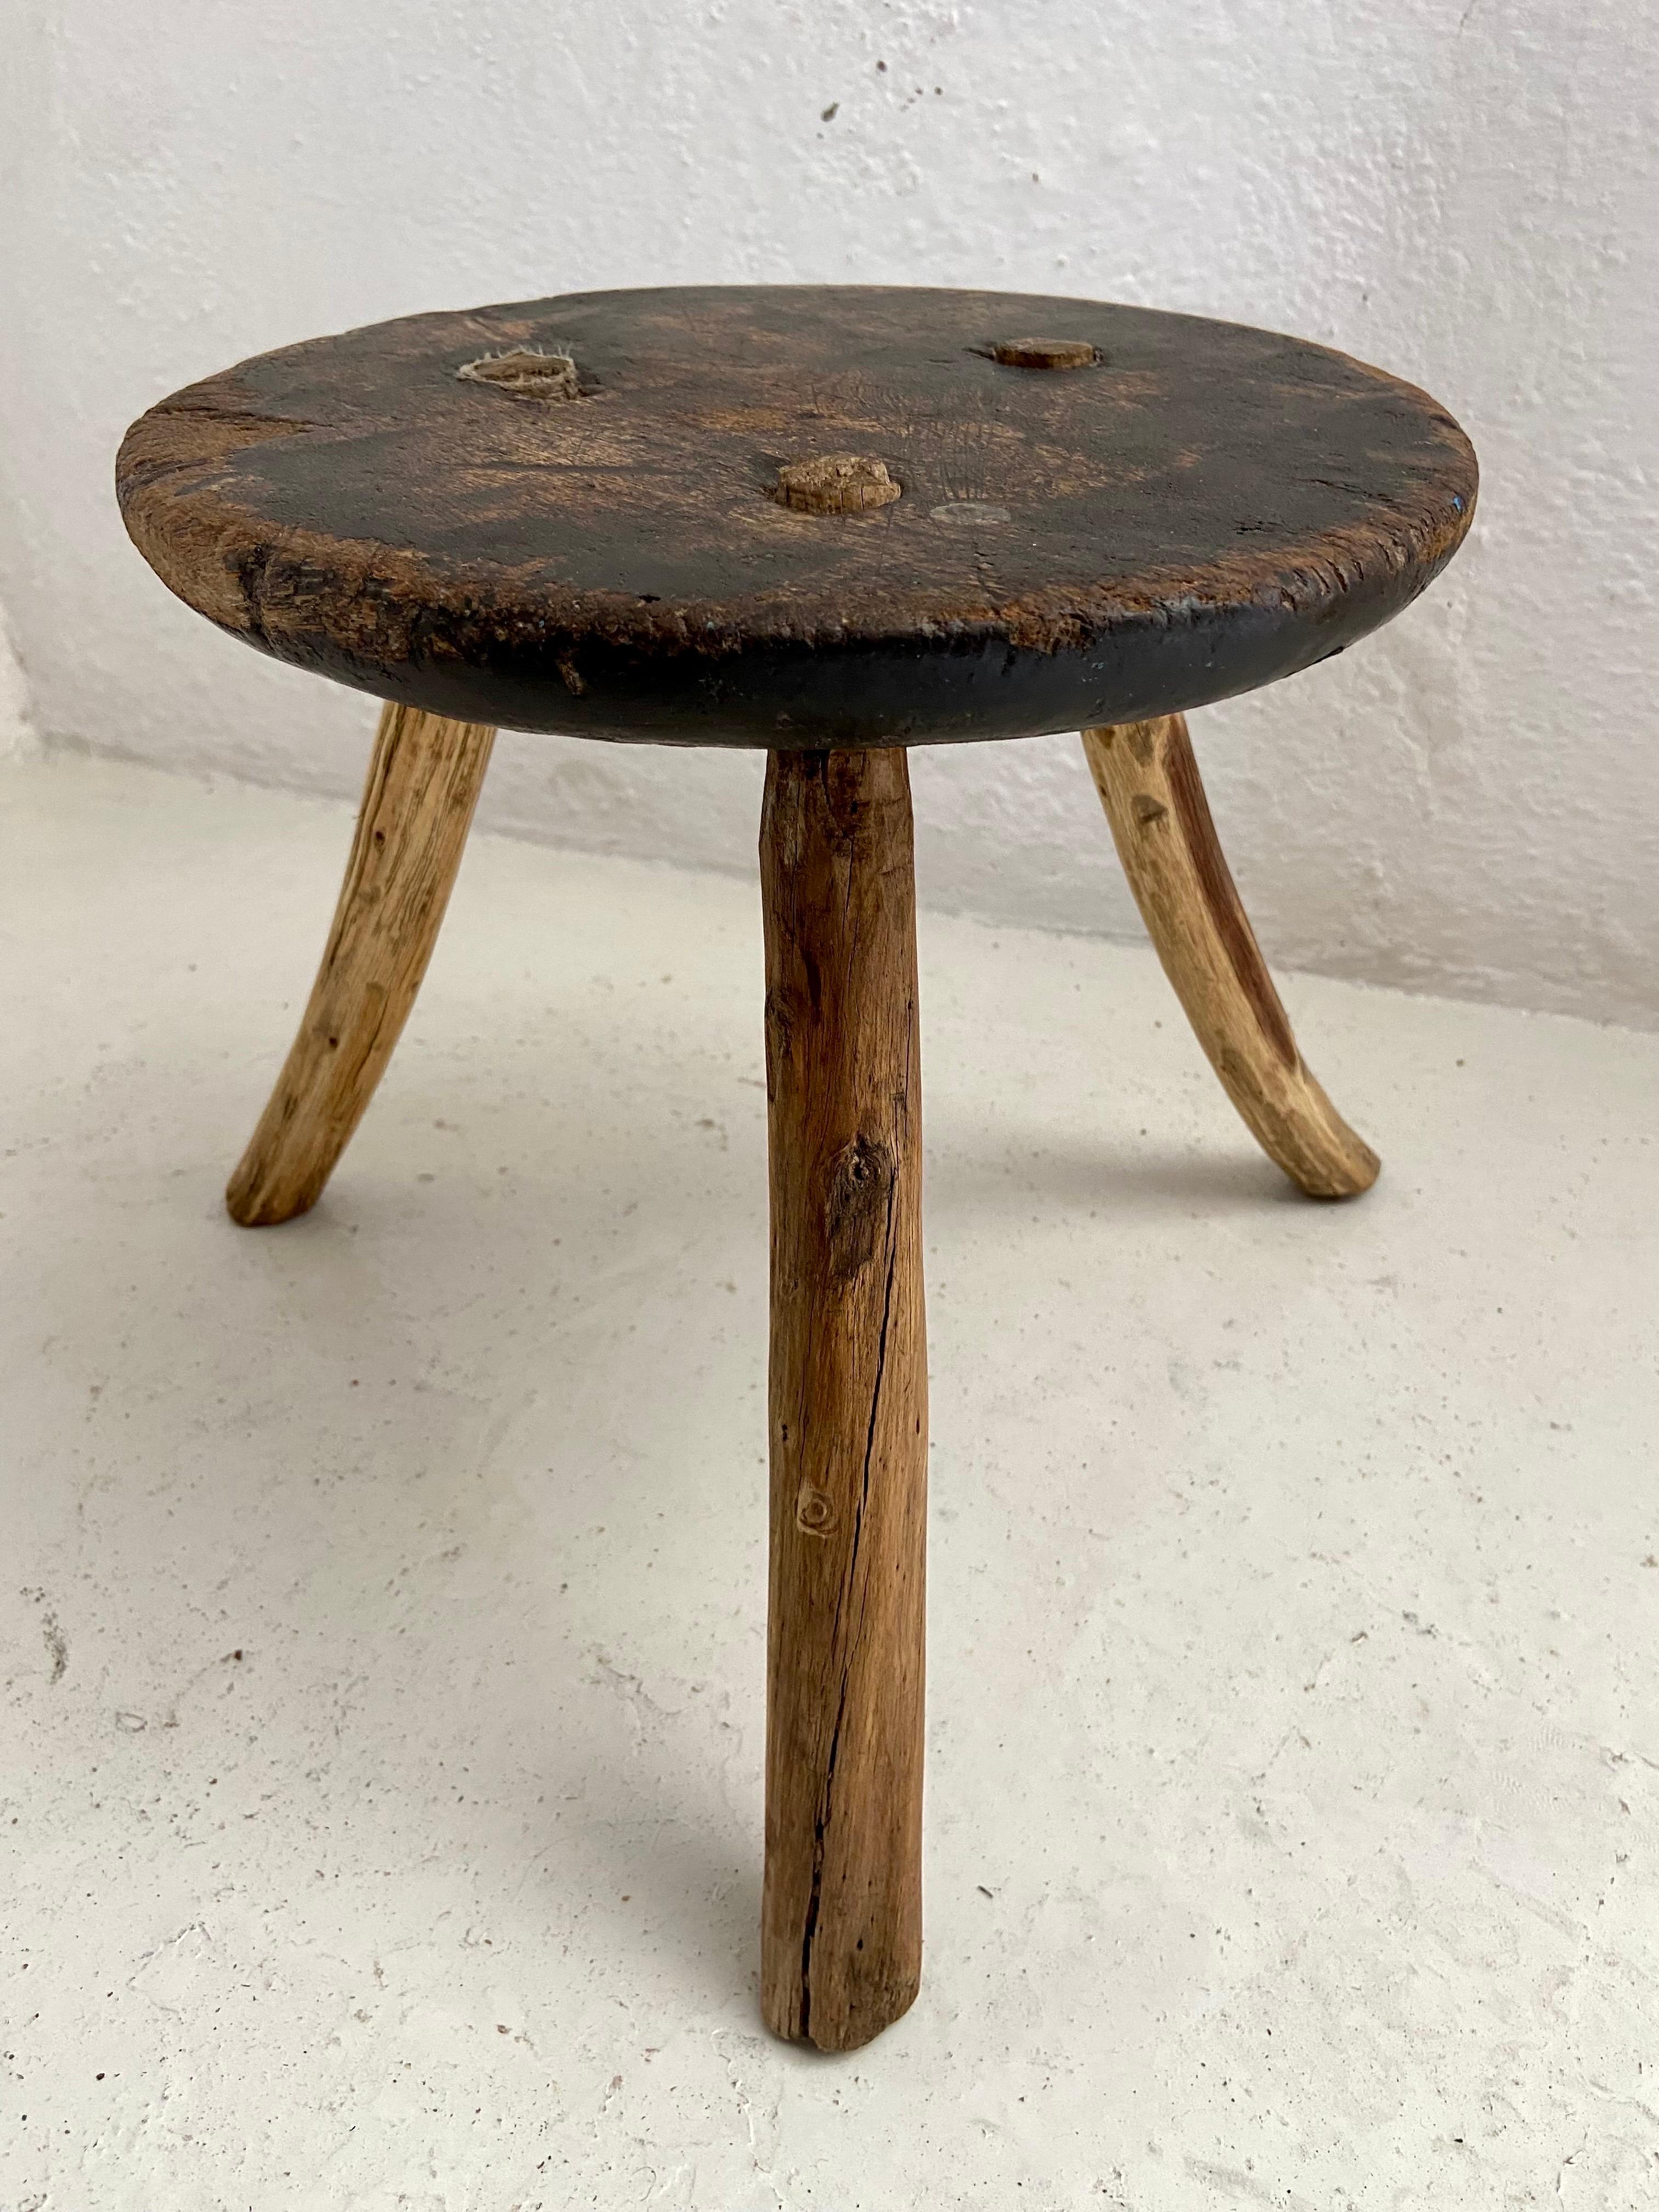 Hand-Carved Hardwood Stool from Mexico, circa 1930´s